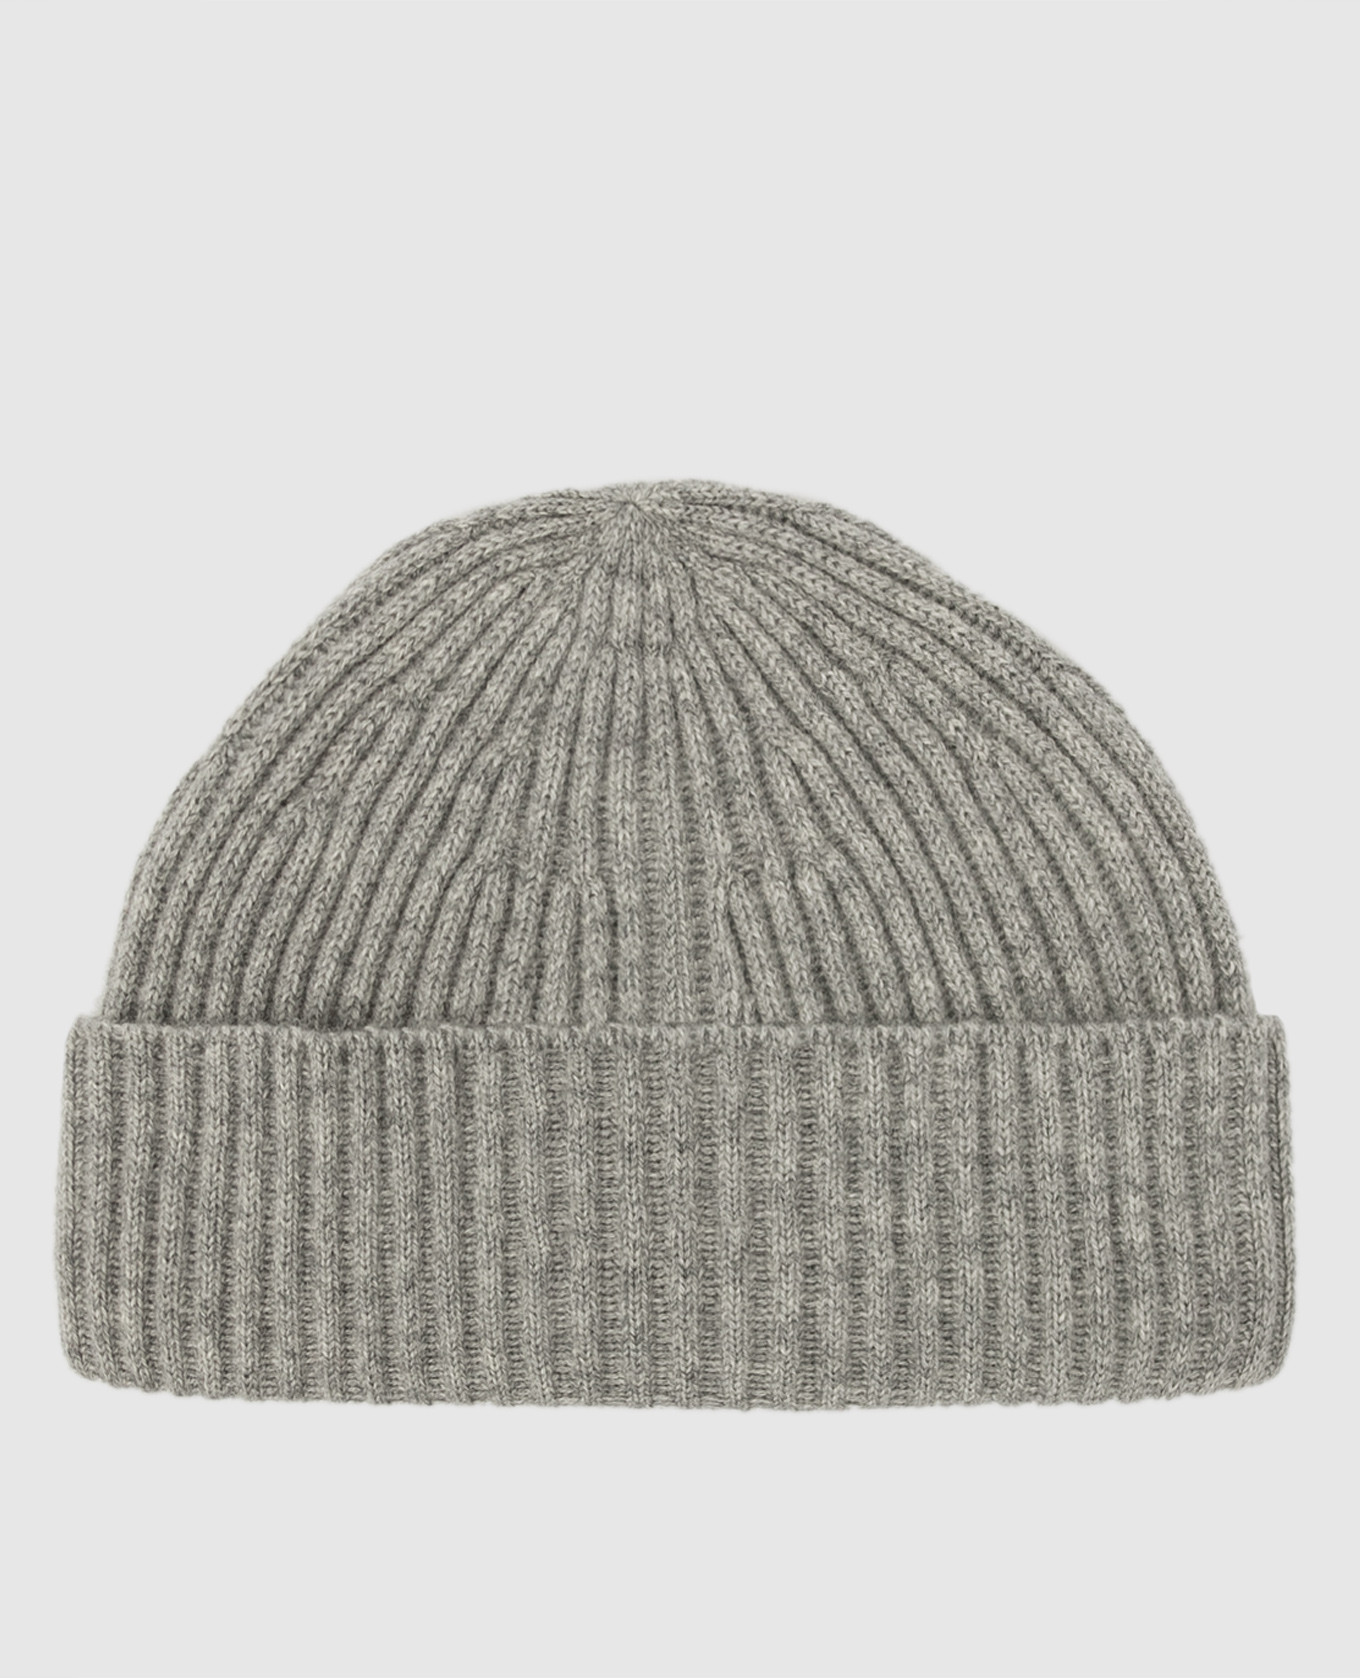 Light gray ribbed cashmere hat